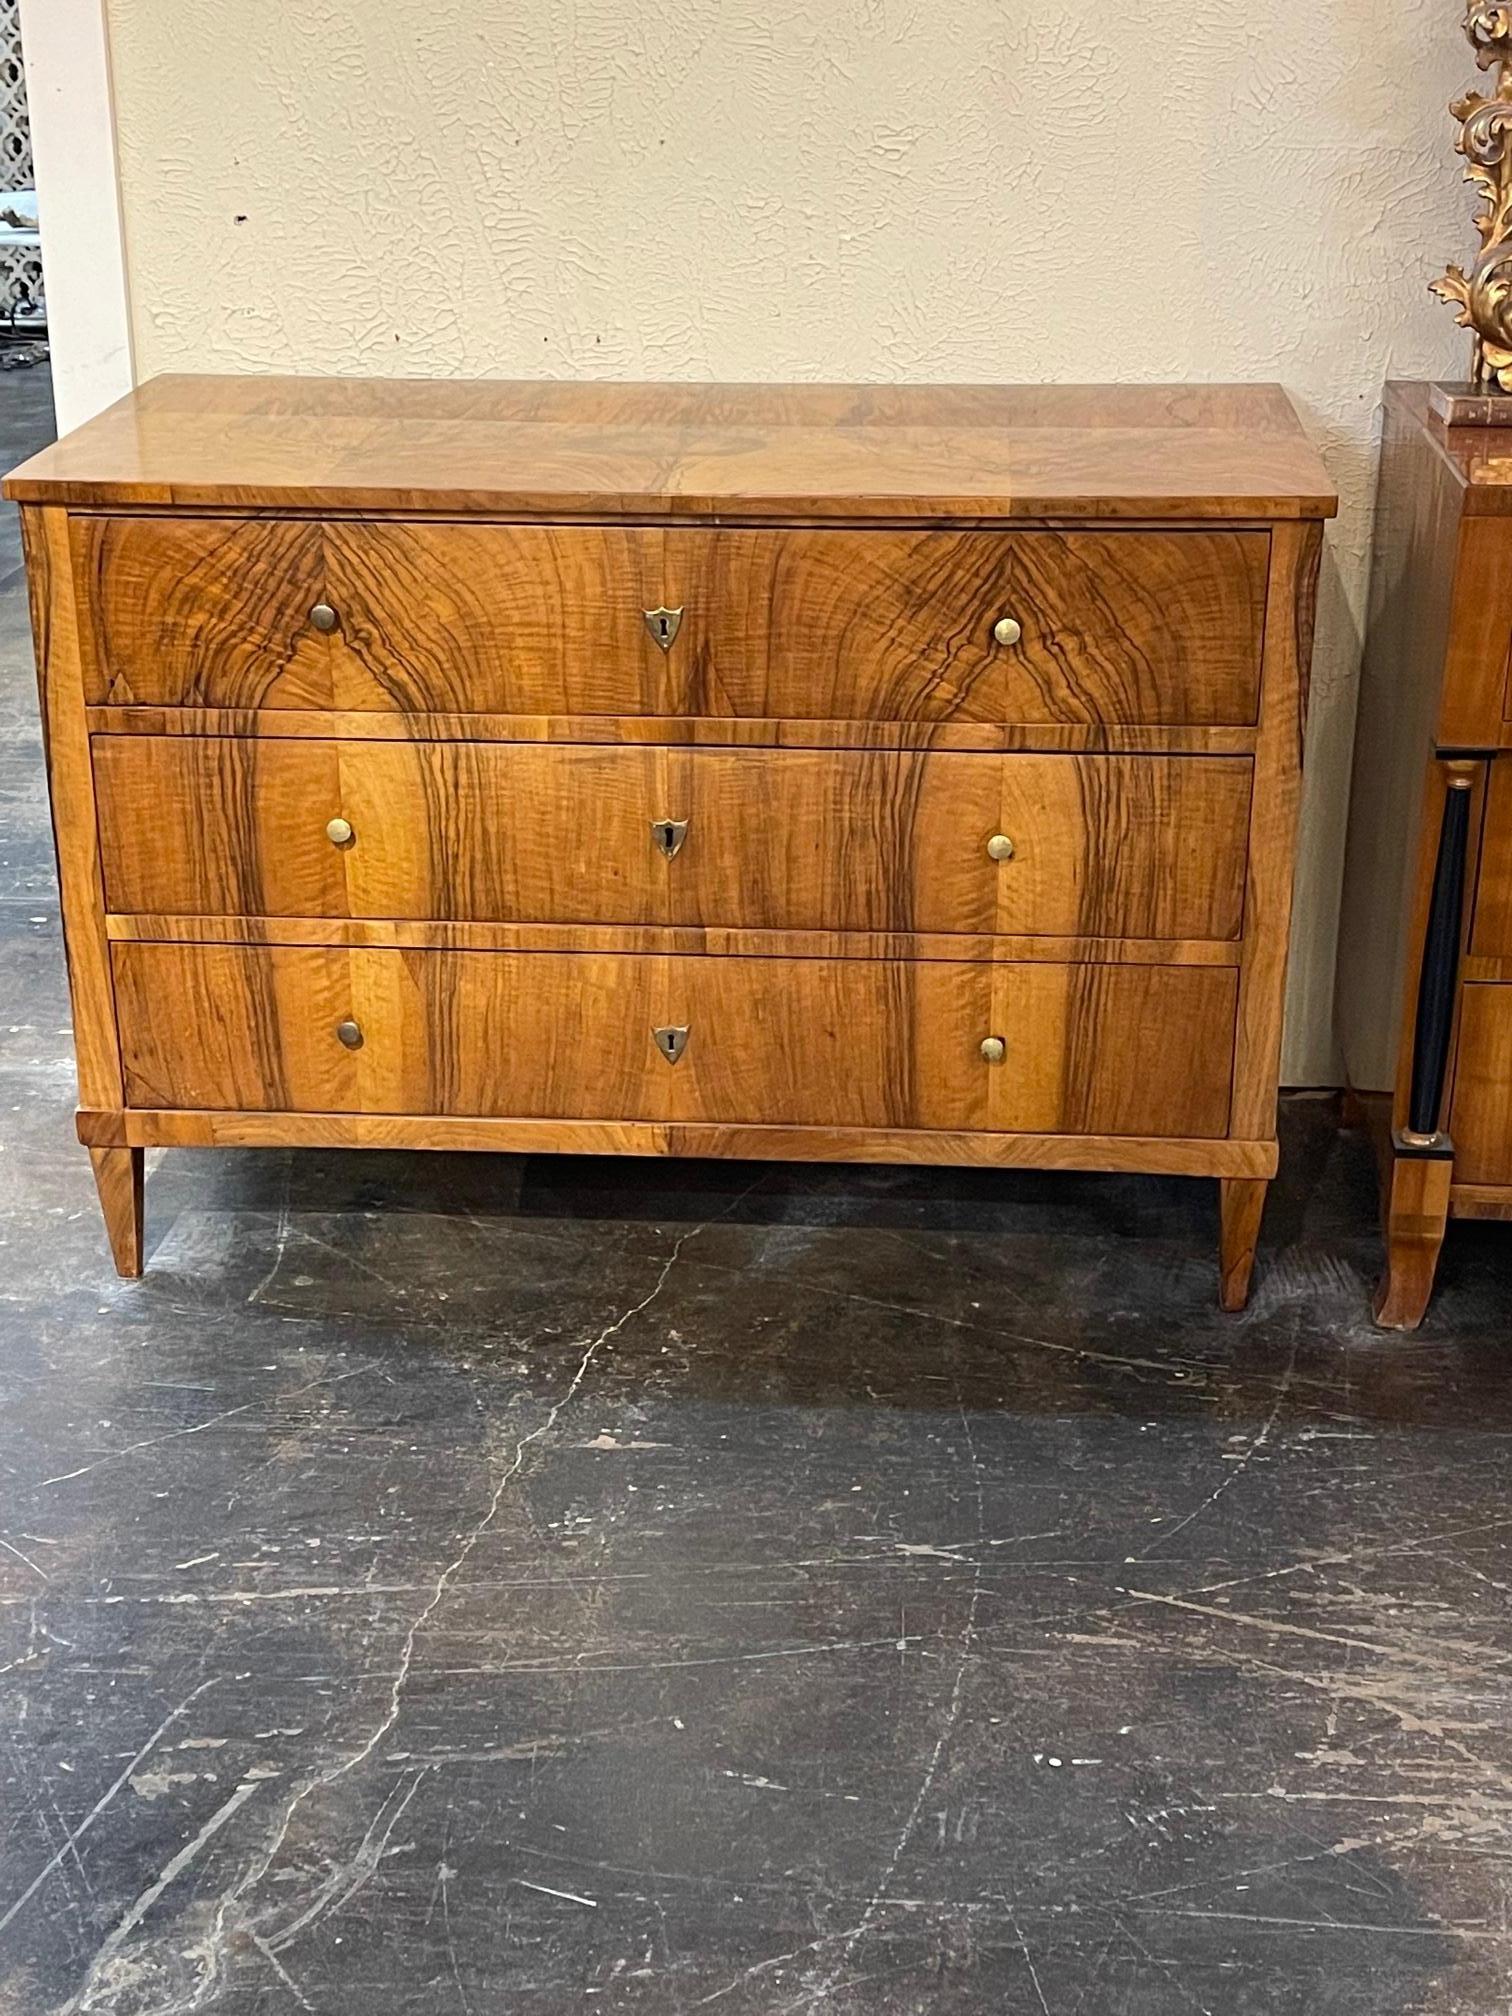 19th century Biedermeier walnut commode, Circa 1885. The is a very handsome commode with beautiful wood grain and polish. Perfect for any space.